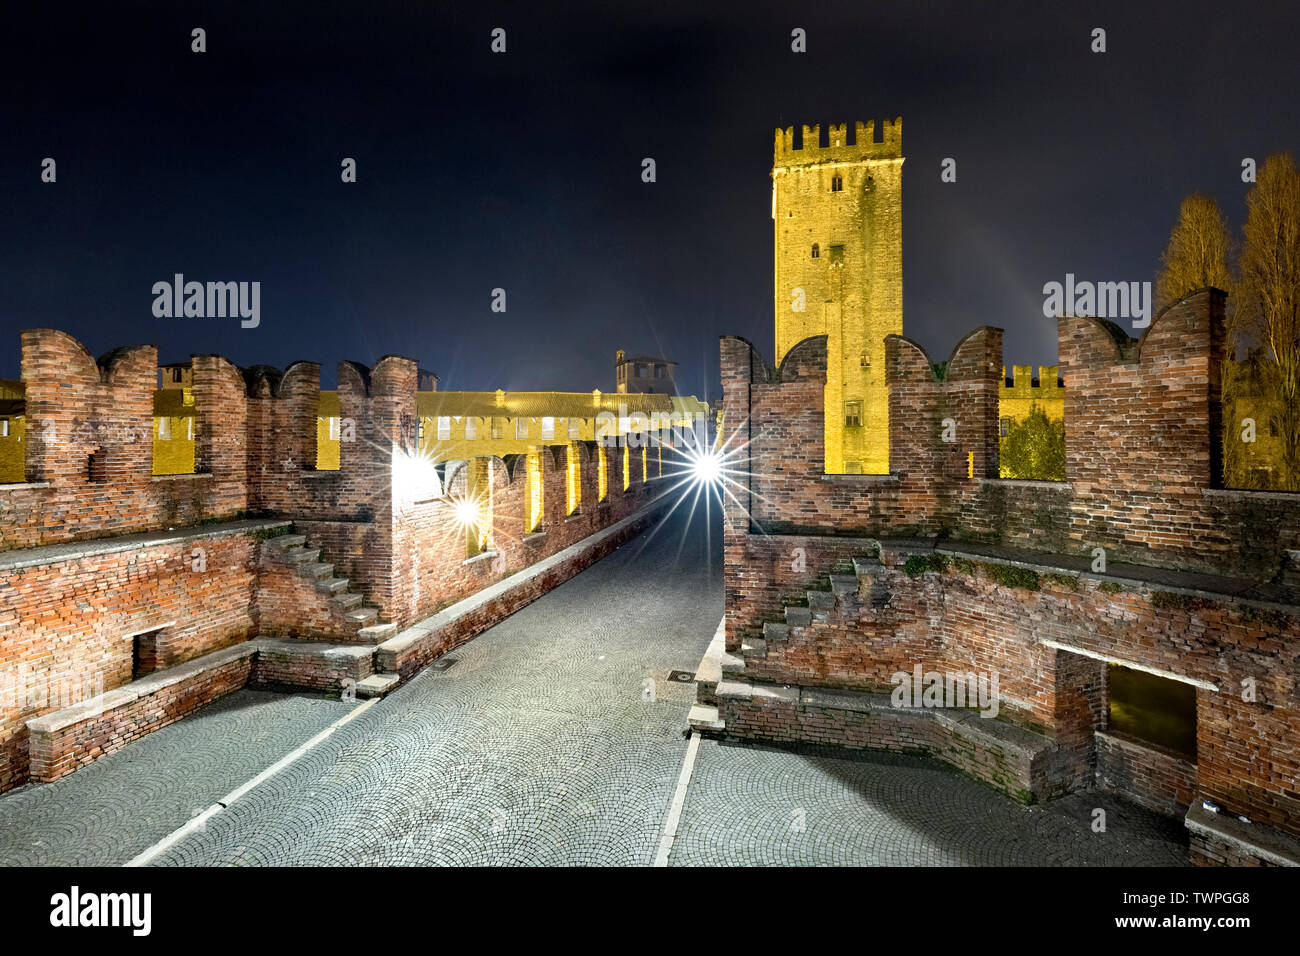 The Scaligero bridge in Verona. Built in the Middle Ages, it was destroyed in the Second World War and rebuilt in the post-war period. Verona, Italy. Stock Photo